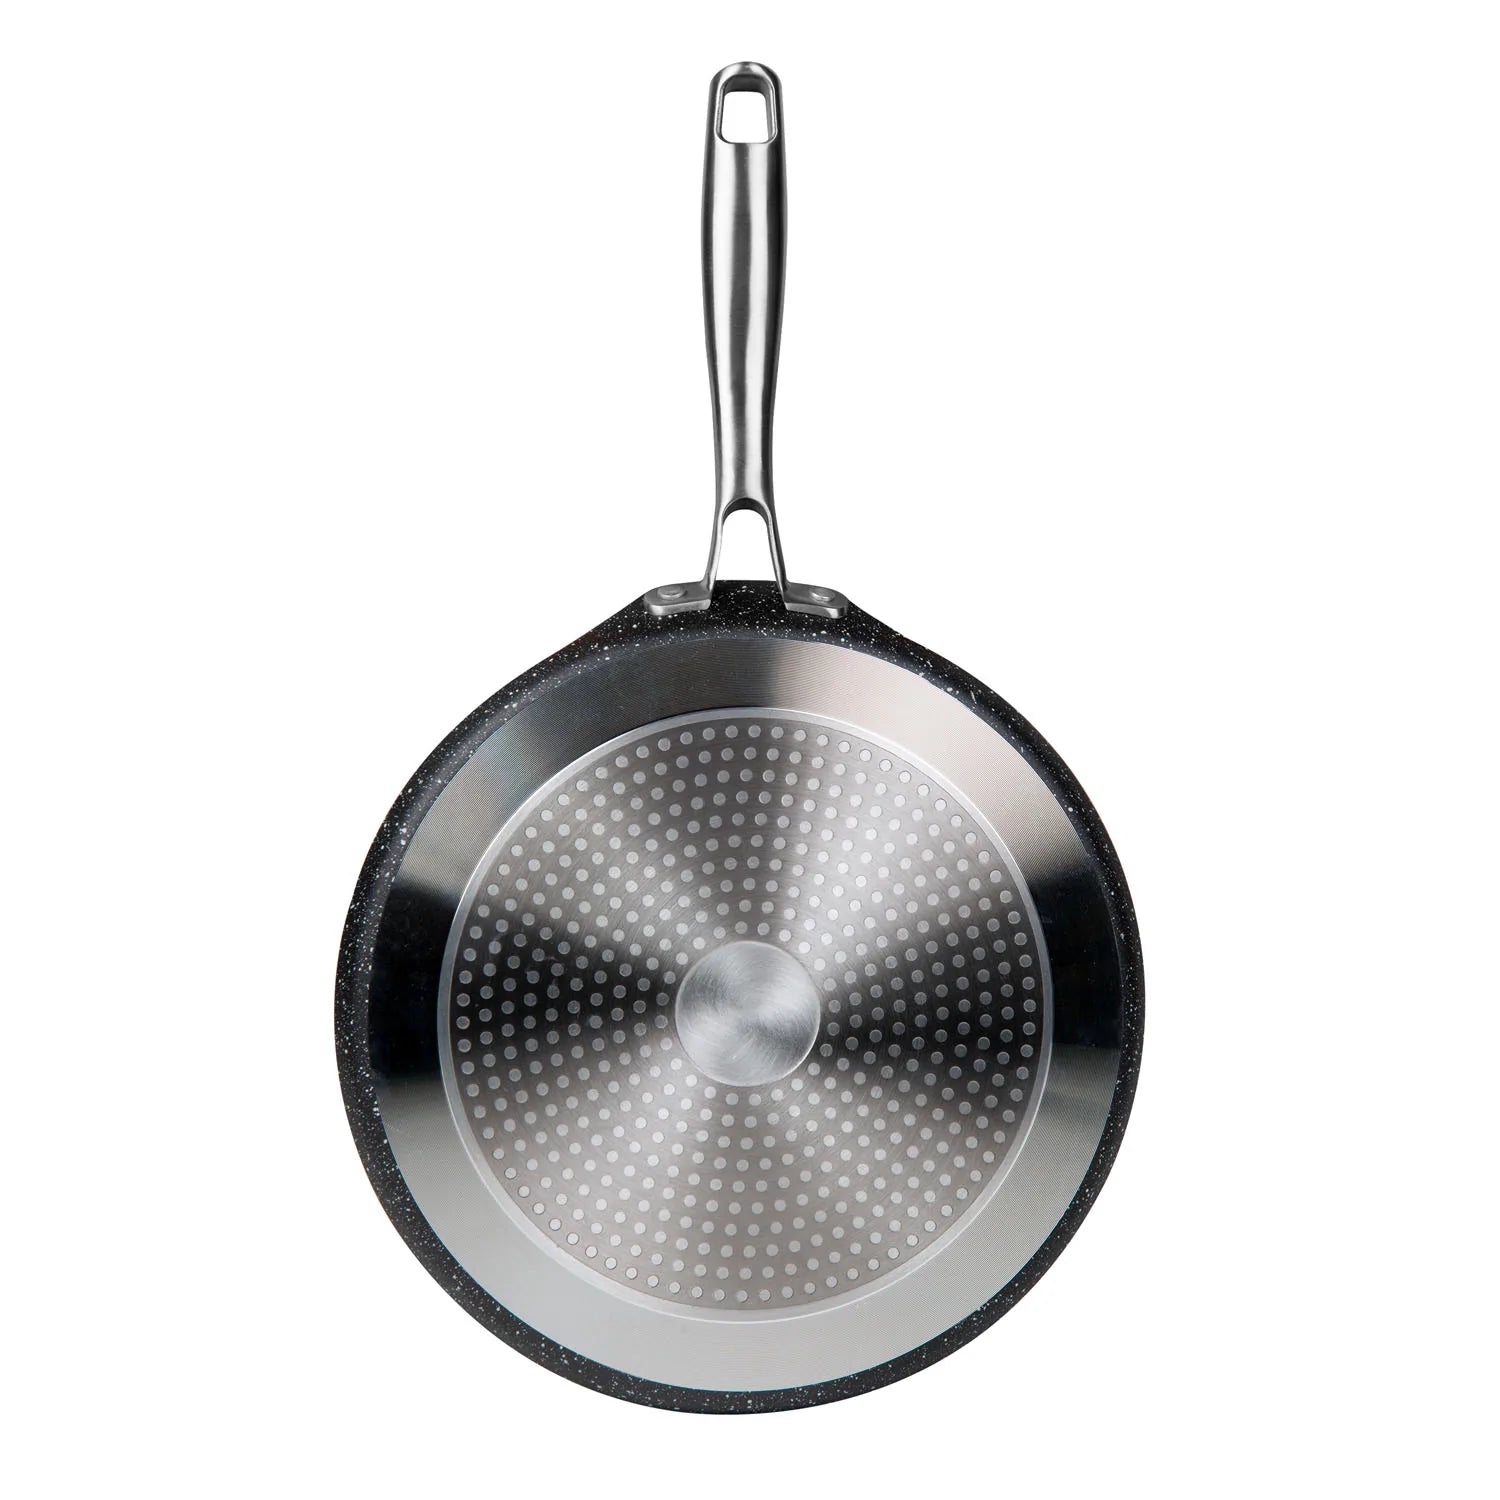 MASTERPAN Innovative Series 11” Crepe Pan, Non-stick Aluminum Cookware With Stainless Steel Riveted Handle